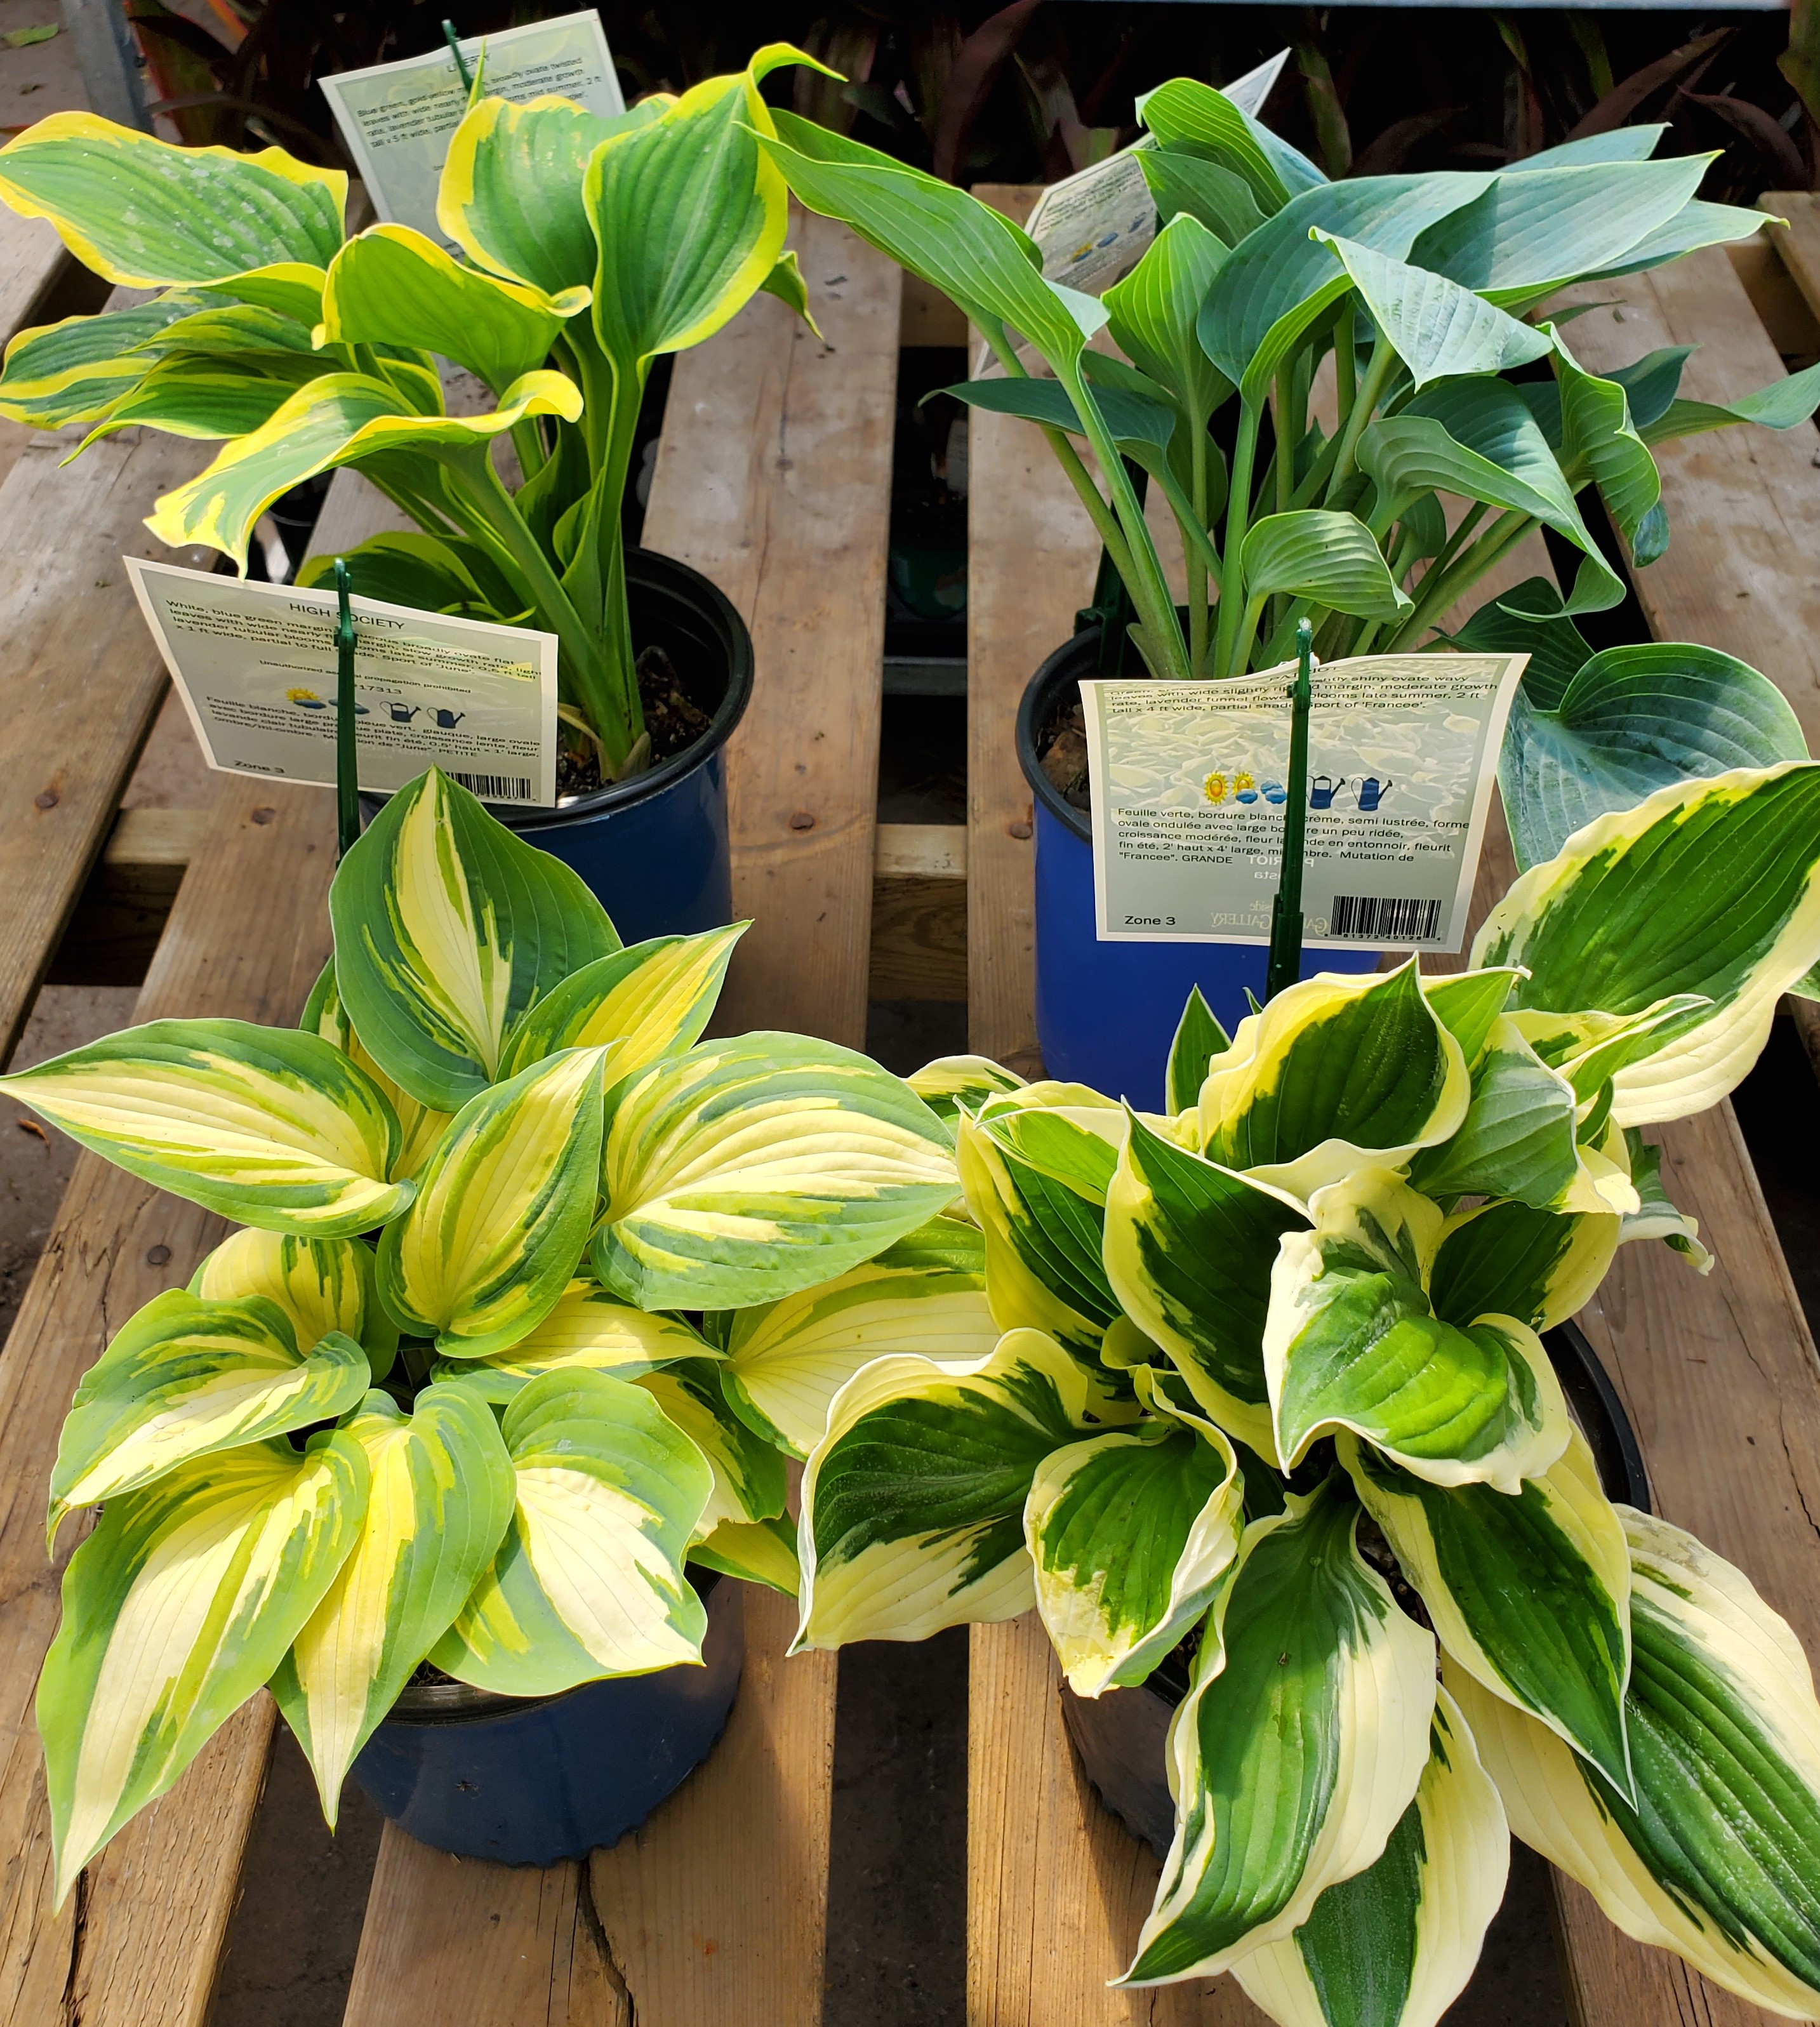 Hosta's are looking great